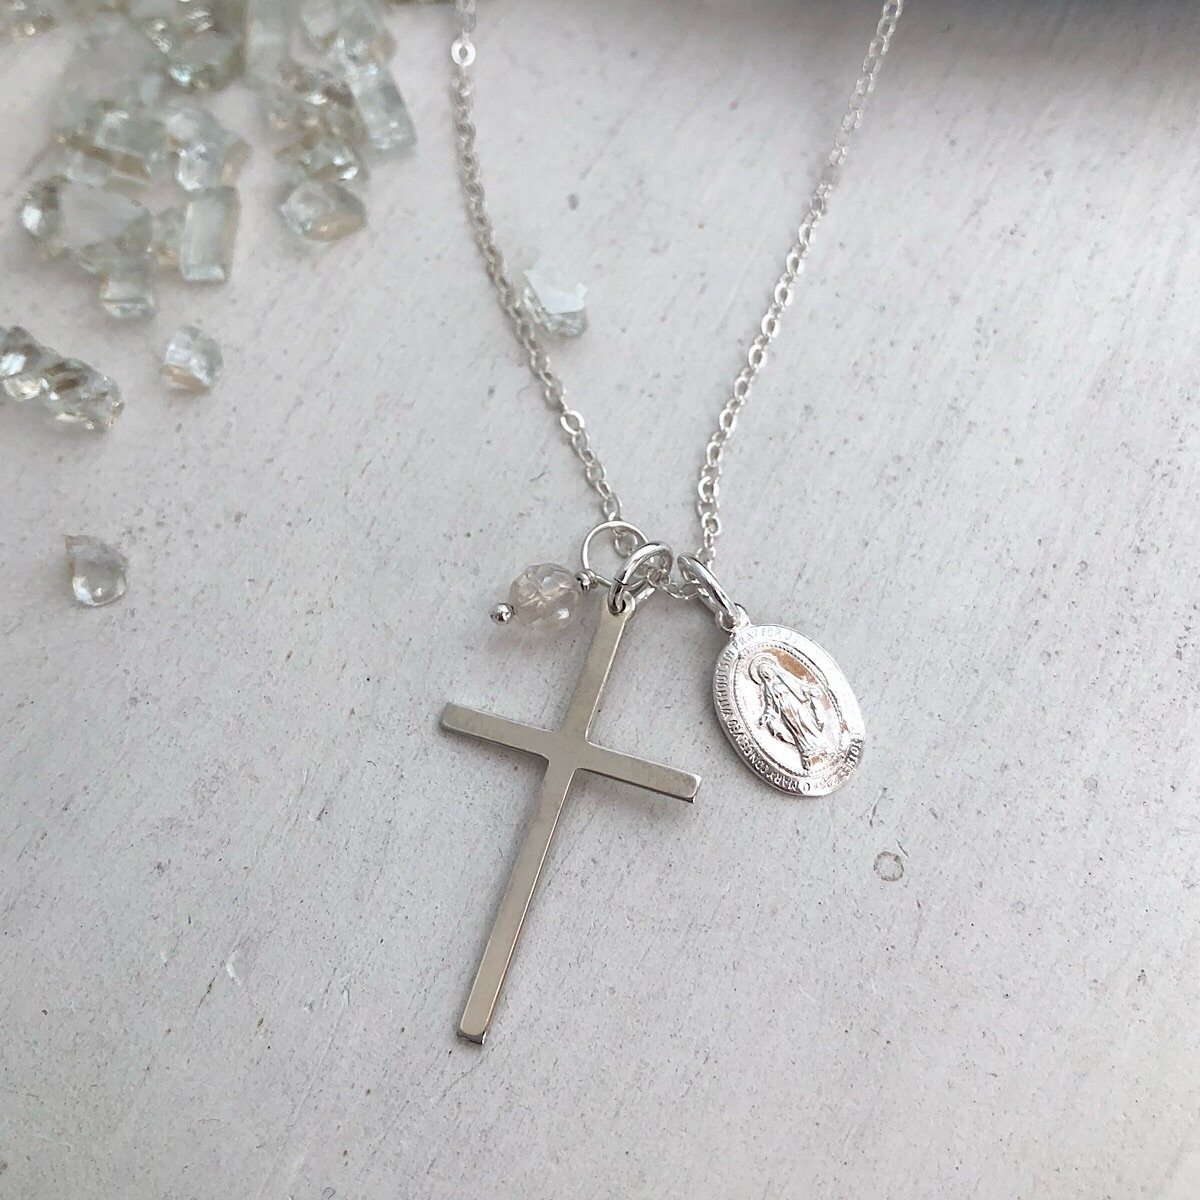 Miraculous Medal Charm Necklace  - IsabelleGraceJewelry